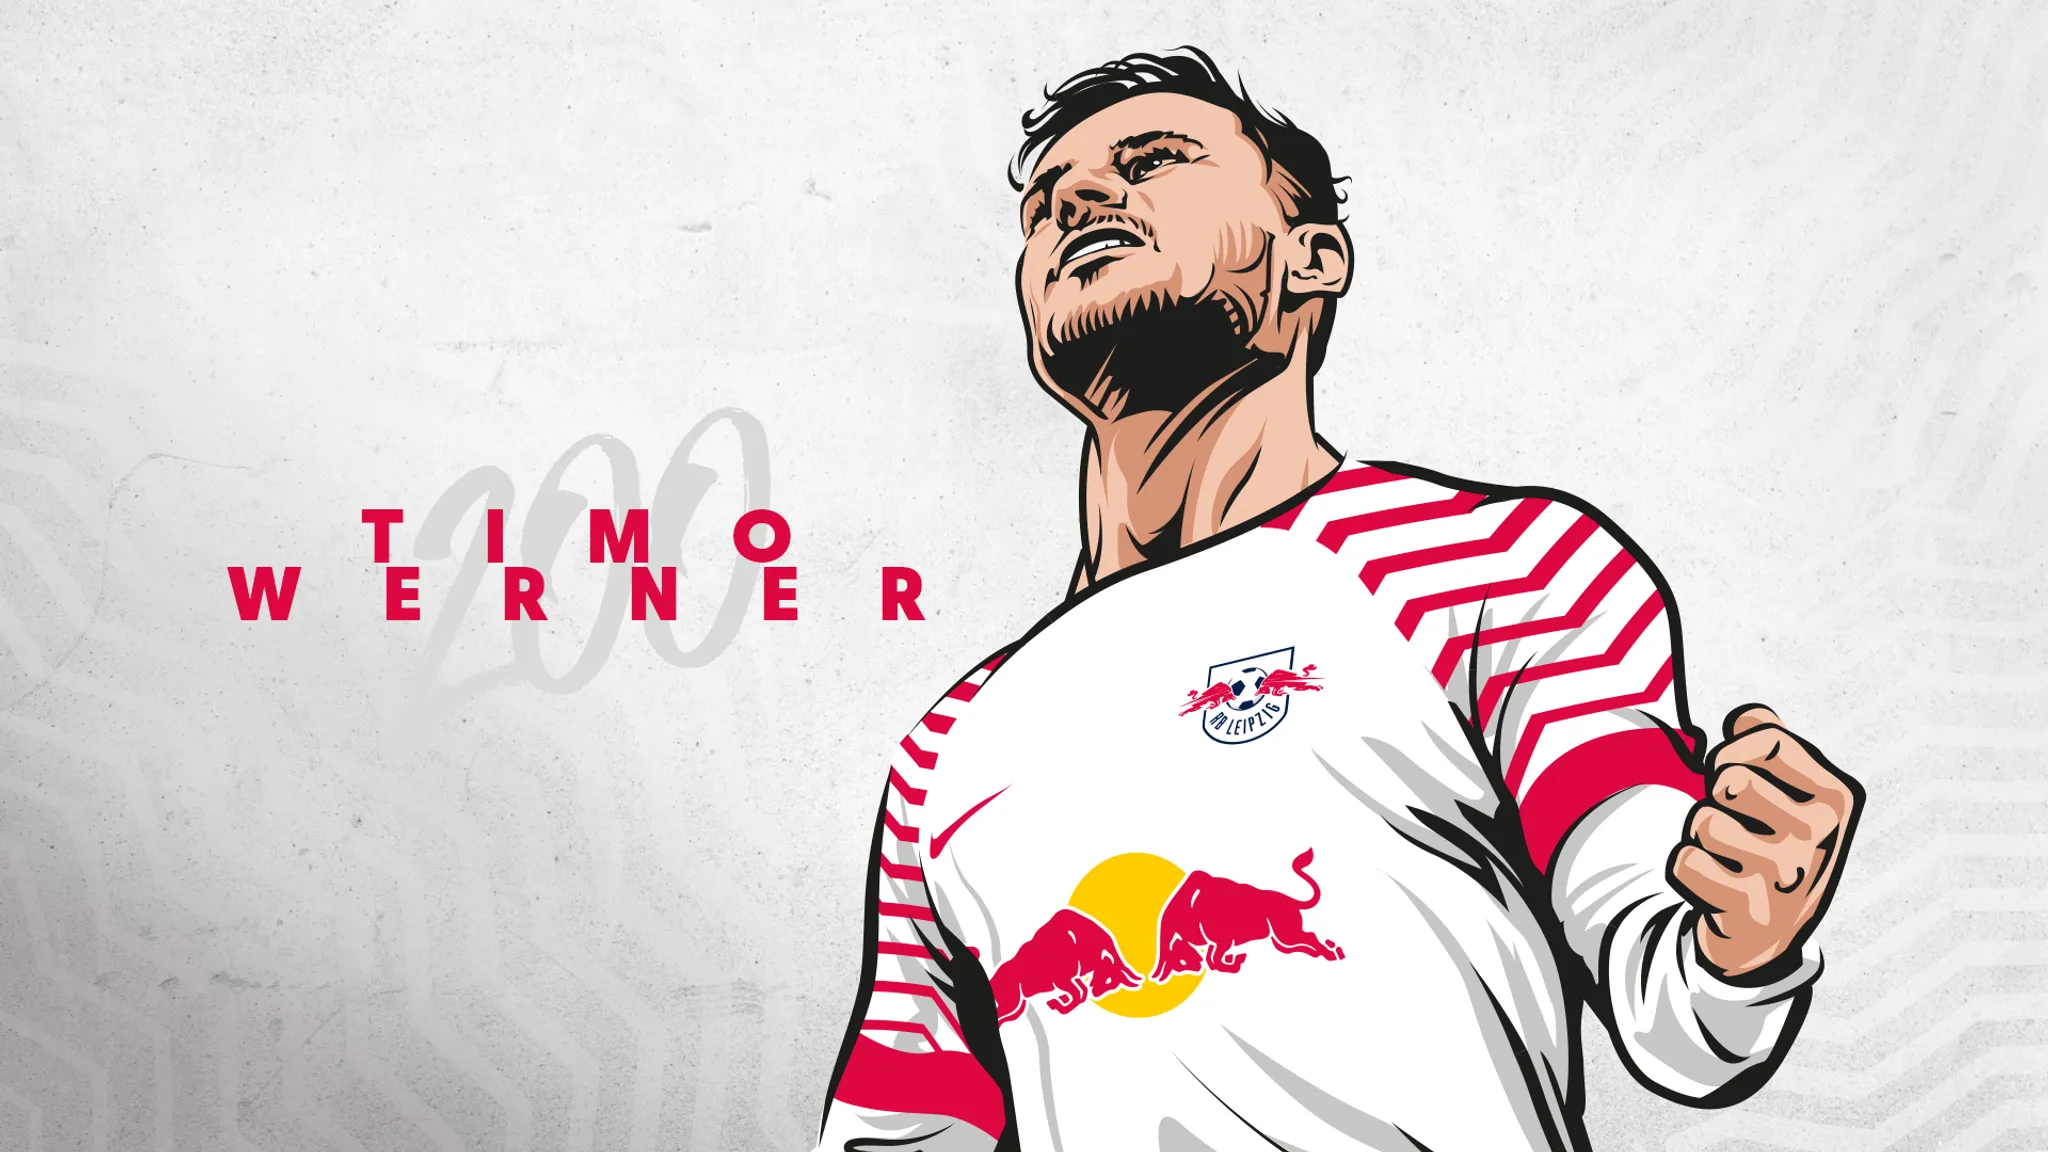 Timo Werner made his 200th competitive game for RB Leipzig at the Supercup in Munich.